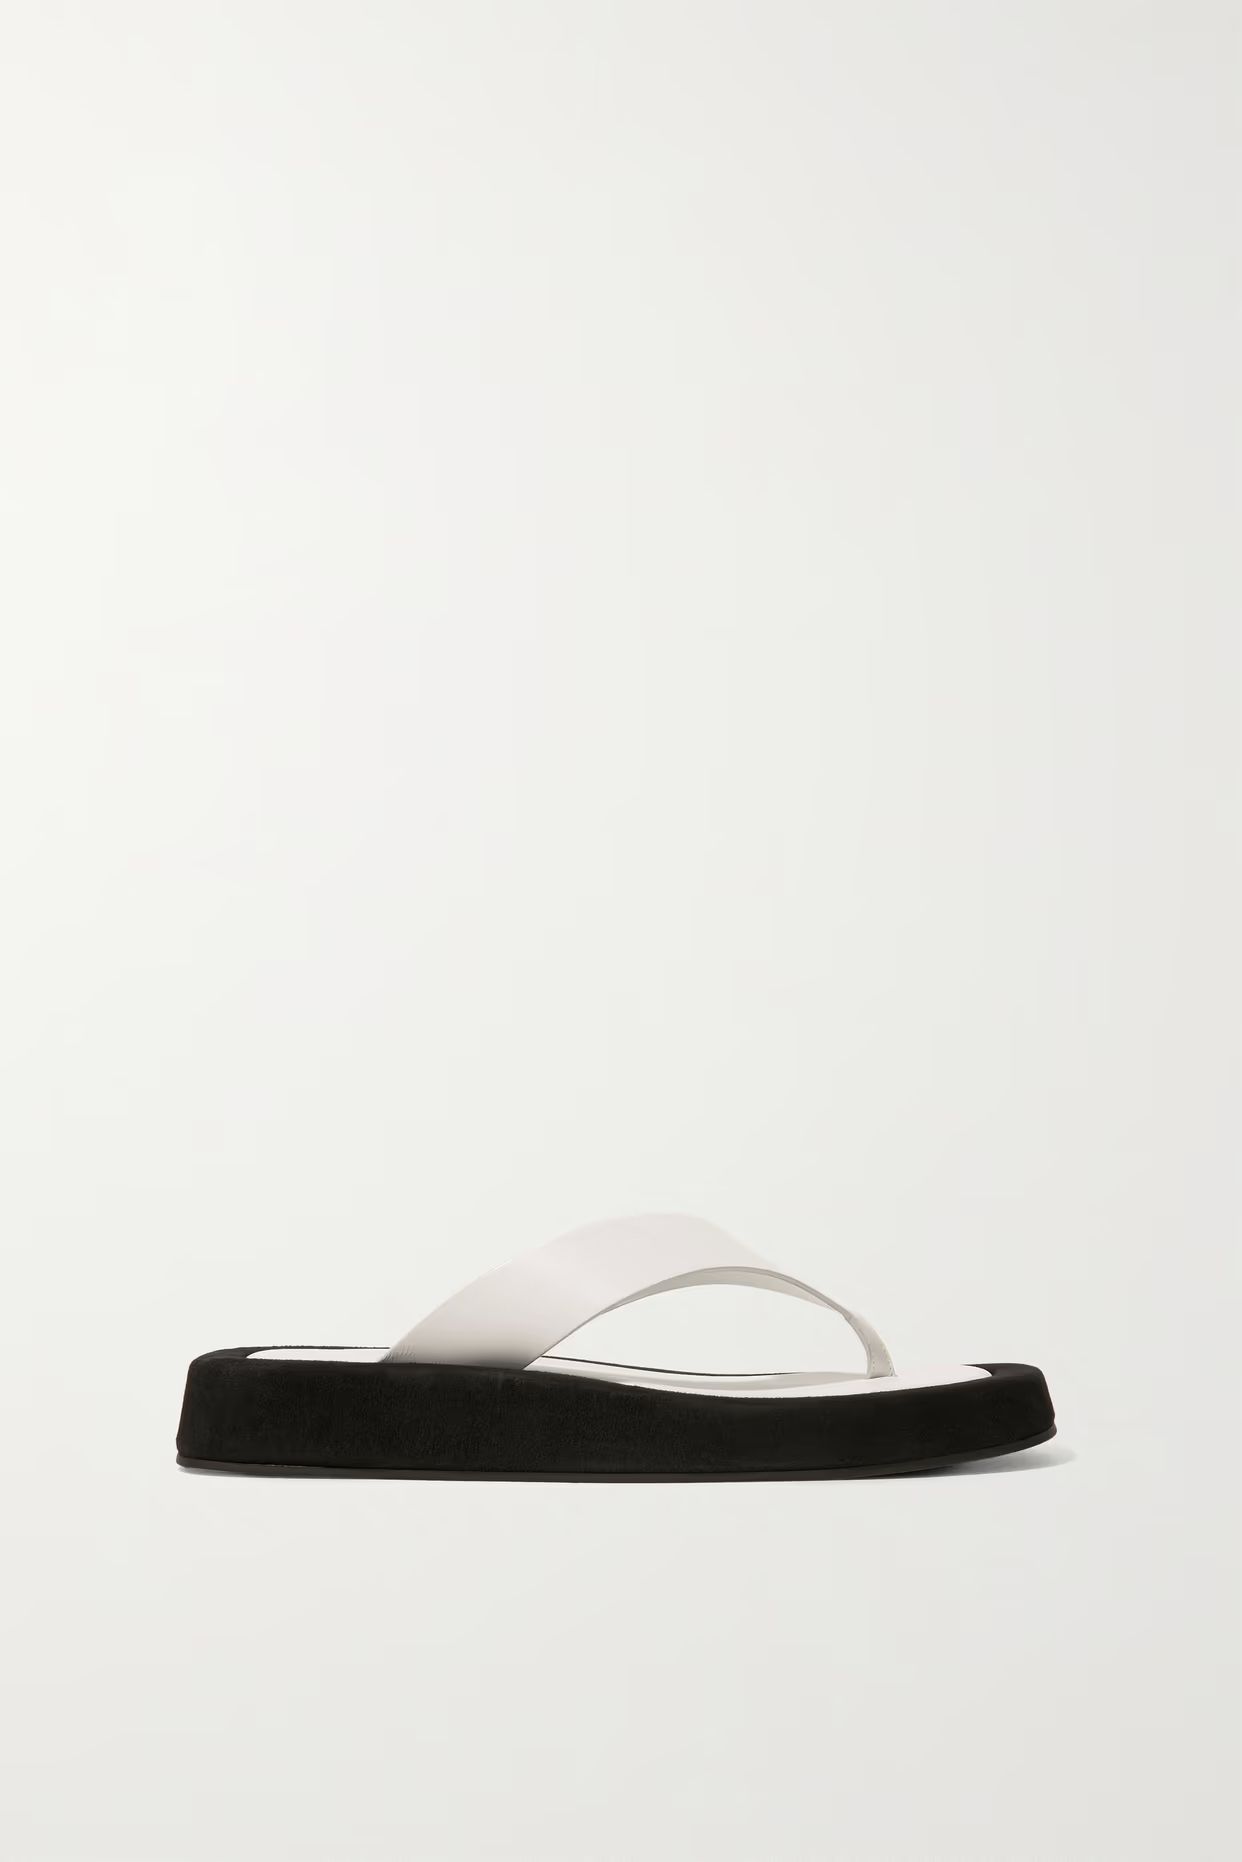 THE ROW - Ginza Two-tone Leather And Suede Platform Flip Flops - White | NET-A-PORTER (US)